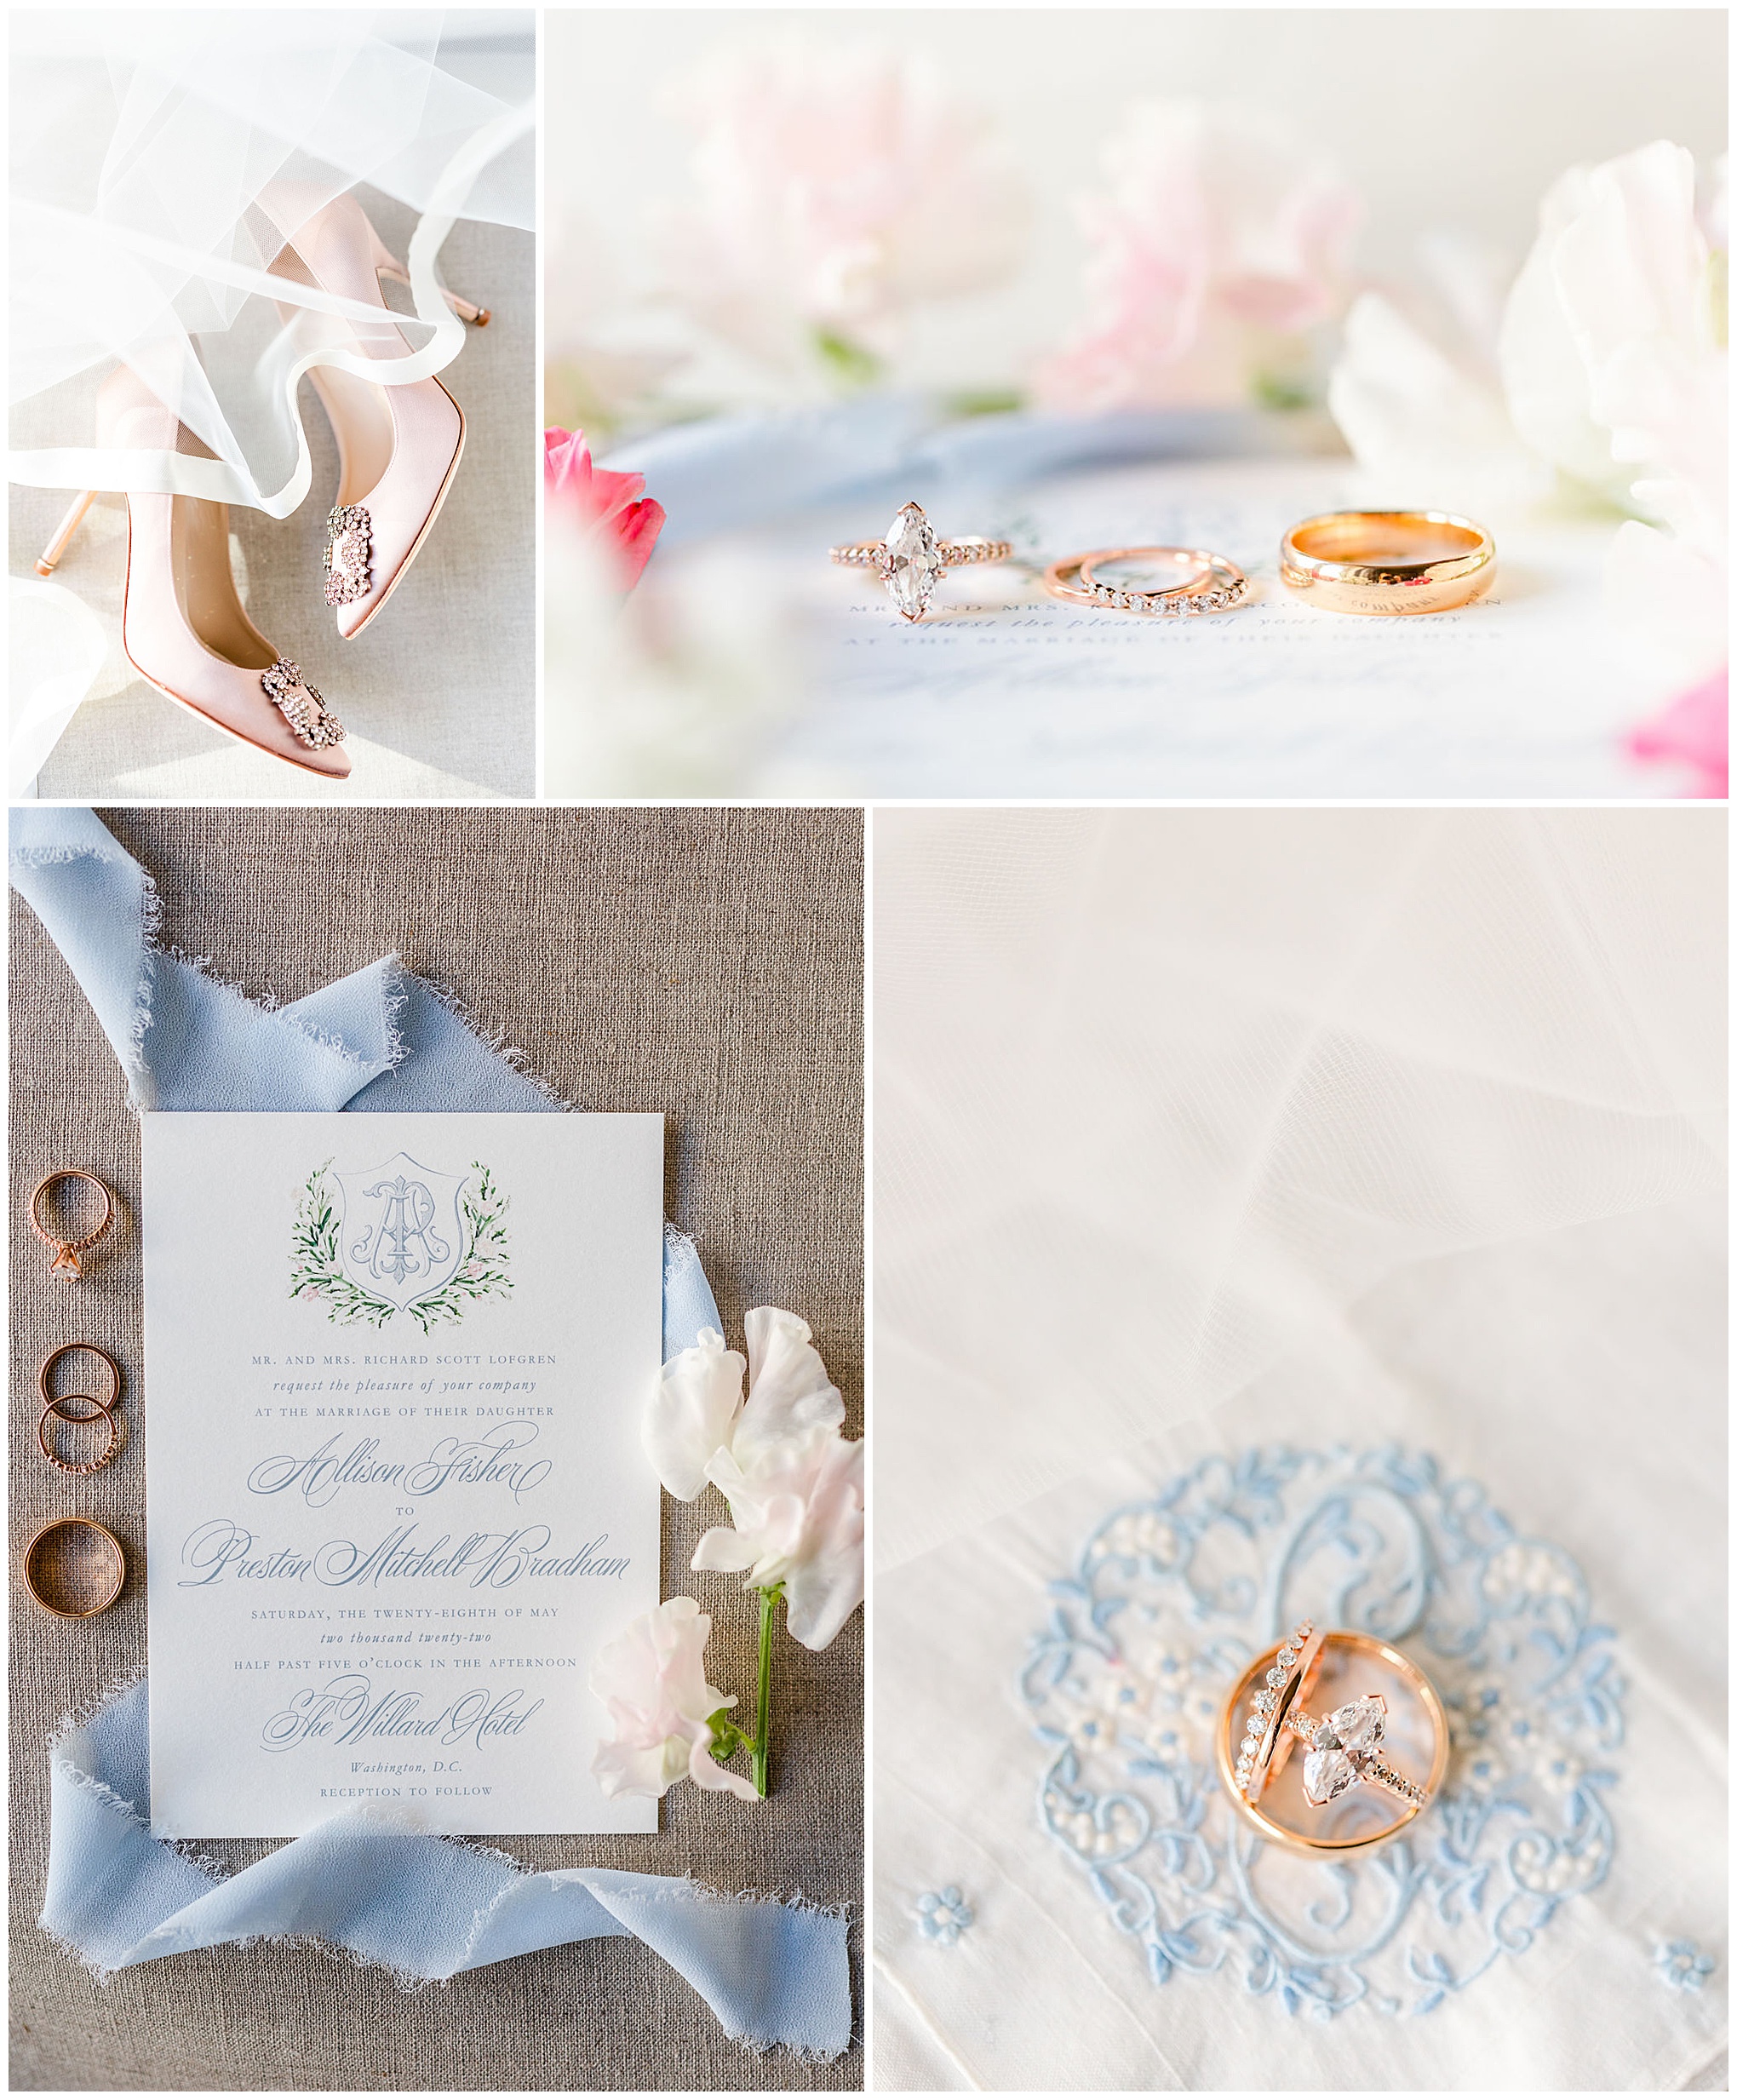 bridal details photo session, bridal details flatlay, flatlay photos, wedding details, wedding details photos, DC wedding photographer, wedding photography details, special wedding photos, flatlay photo session, DC wedding photographer, Rachel E.H. Photography, gold wedding rings on baby blue lace, blue ribbon, baby pink wedding shoes